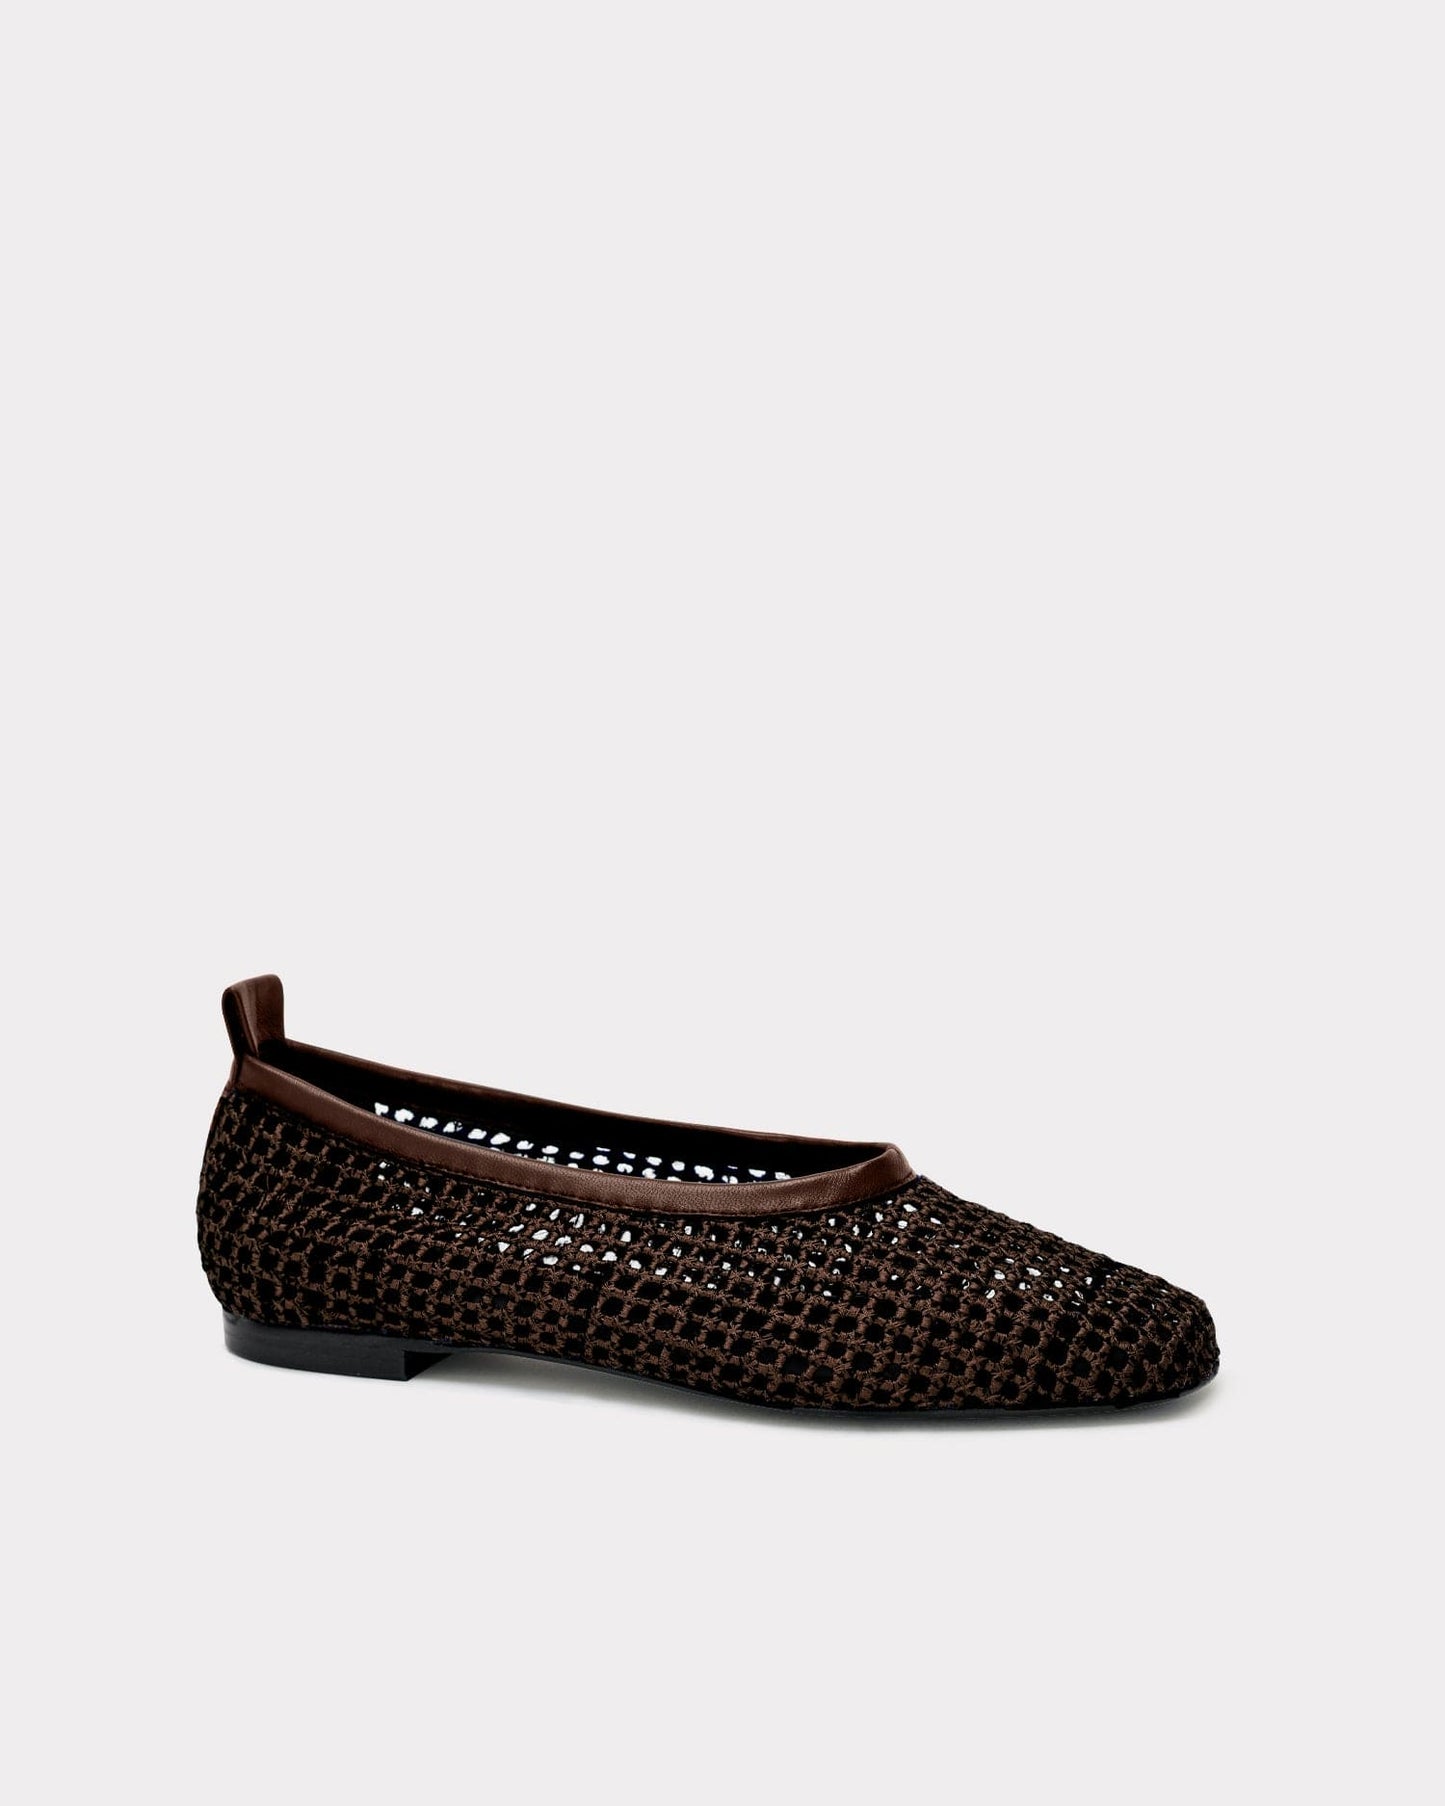 The Foundation Flat - Chocolate Woven